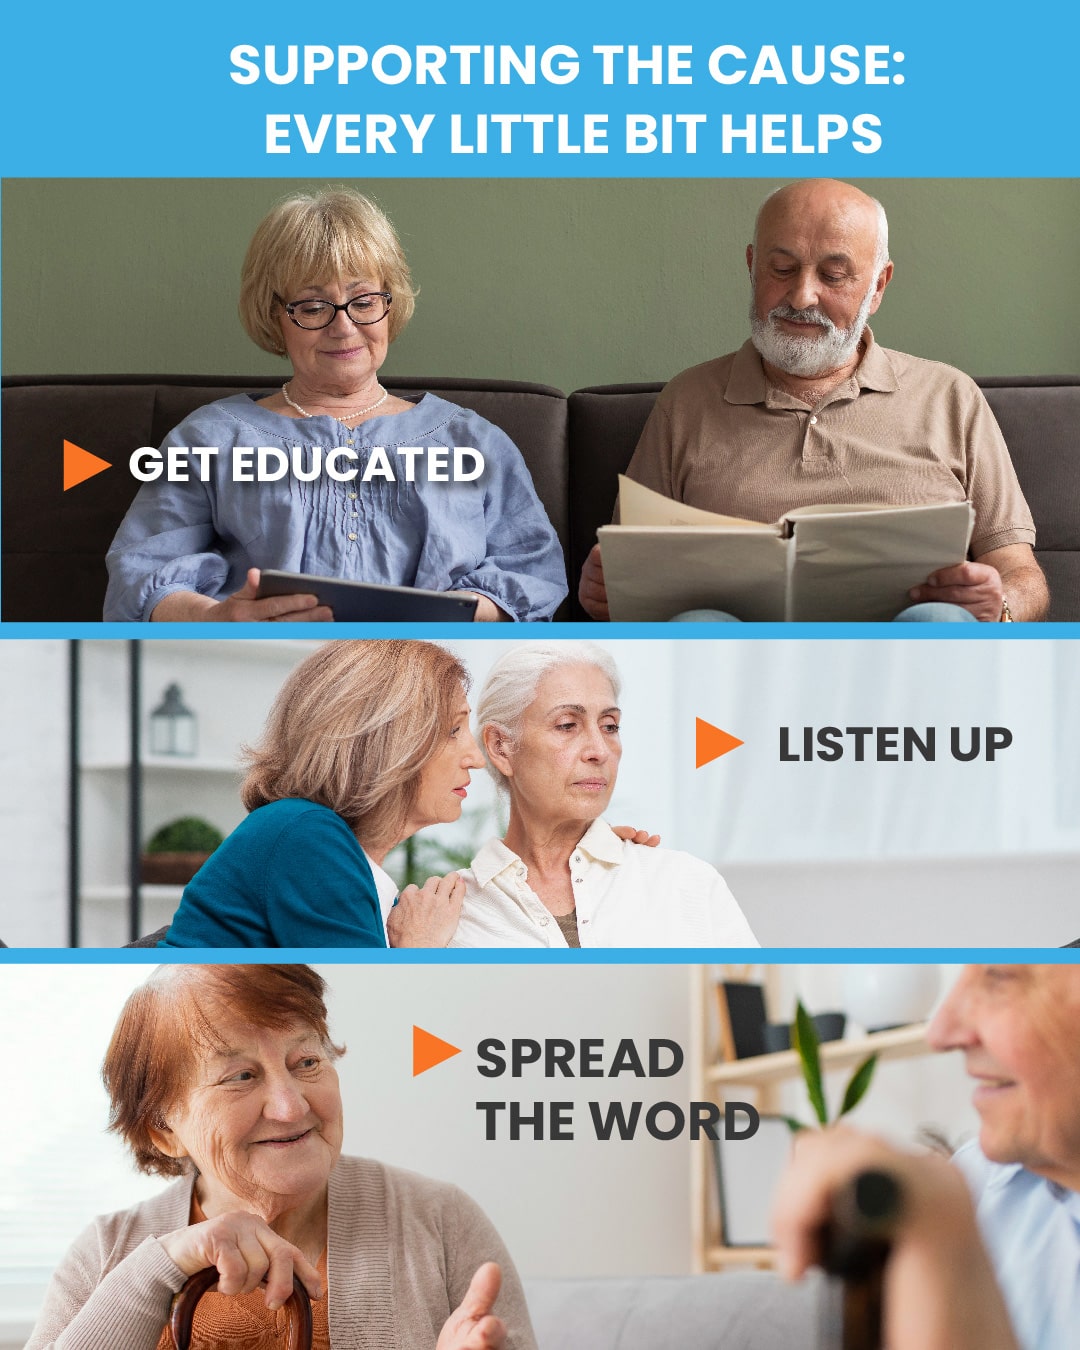 Collage image titled 'Supporting the Cause: Every Little Bit Helps' showcasing three scenes: elderly people reading ('Get Educated'), comforting each other ('Listen Up'), and conversing ('Spread the Word')